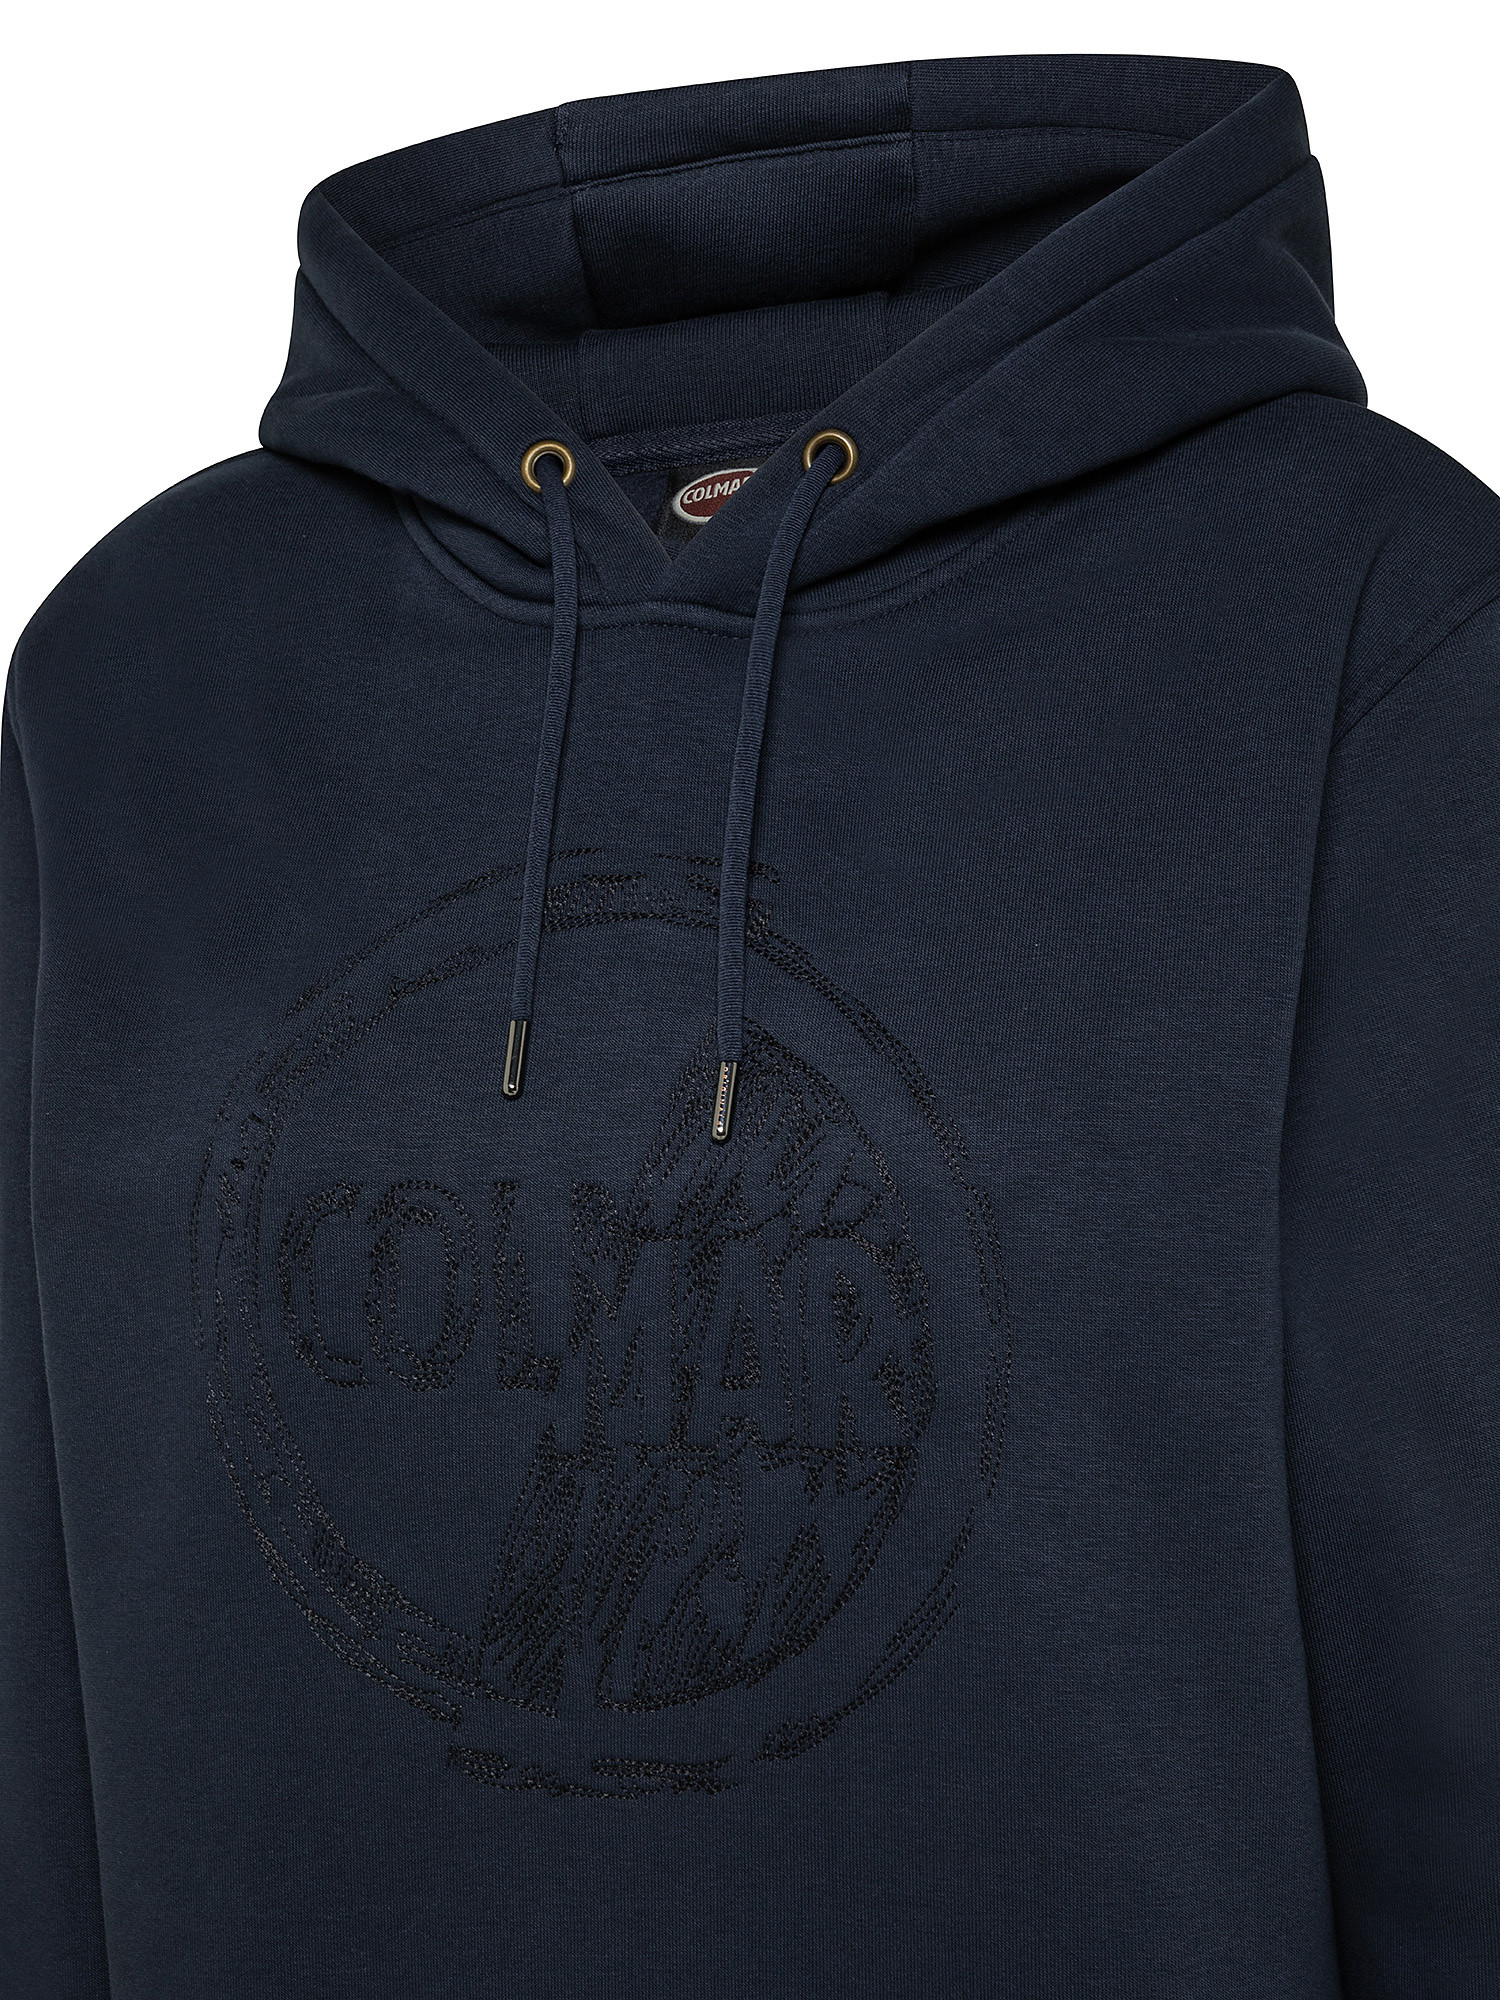 Hoodie sweatshirt with embroidery on chest, Blue, large image number 2